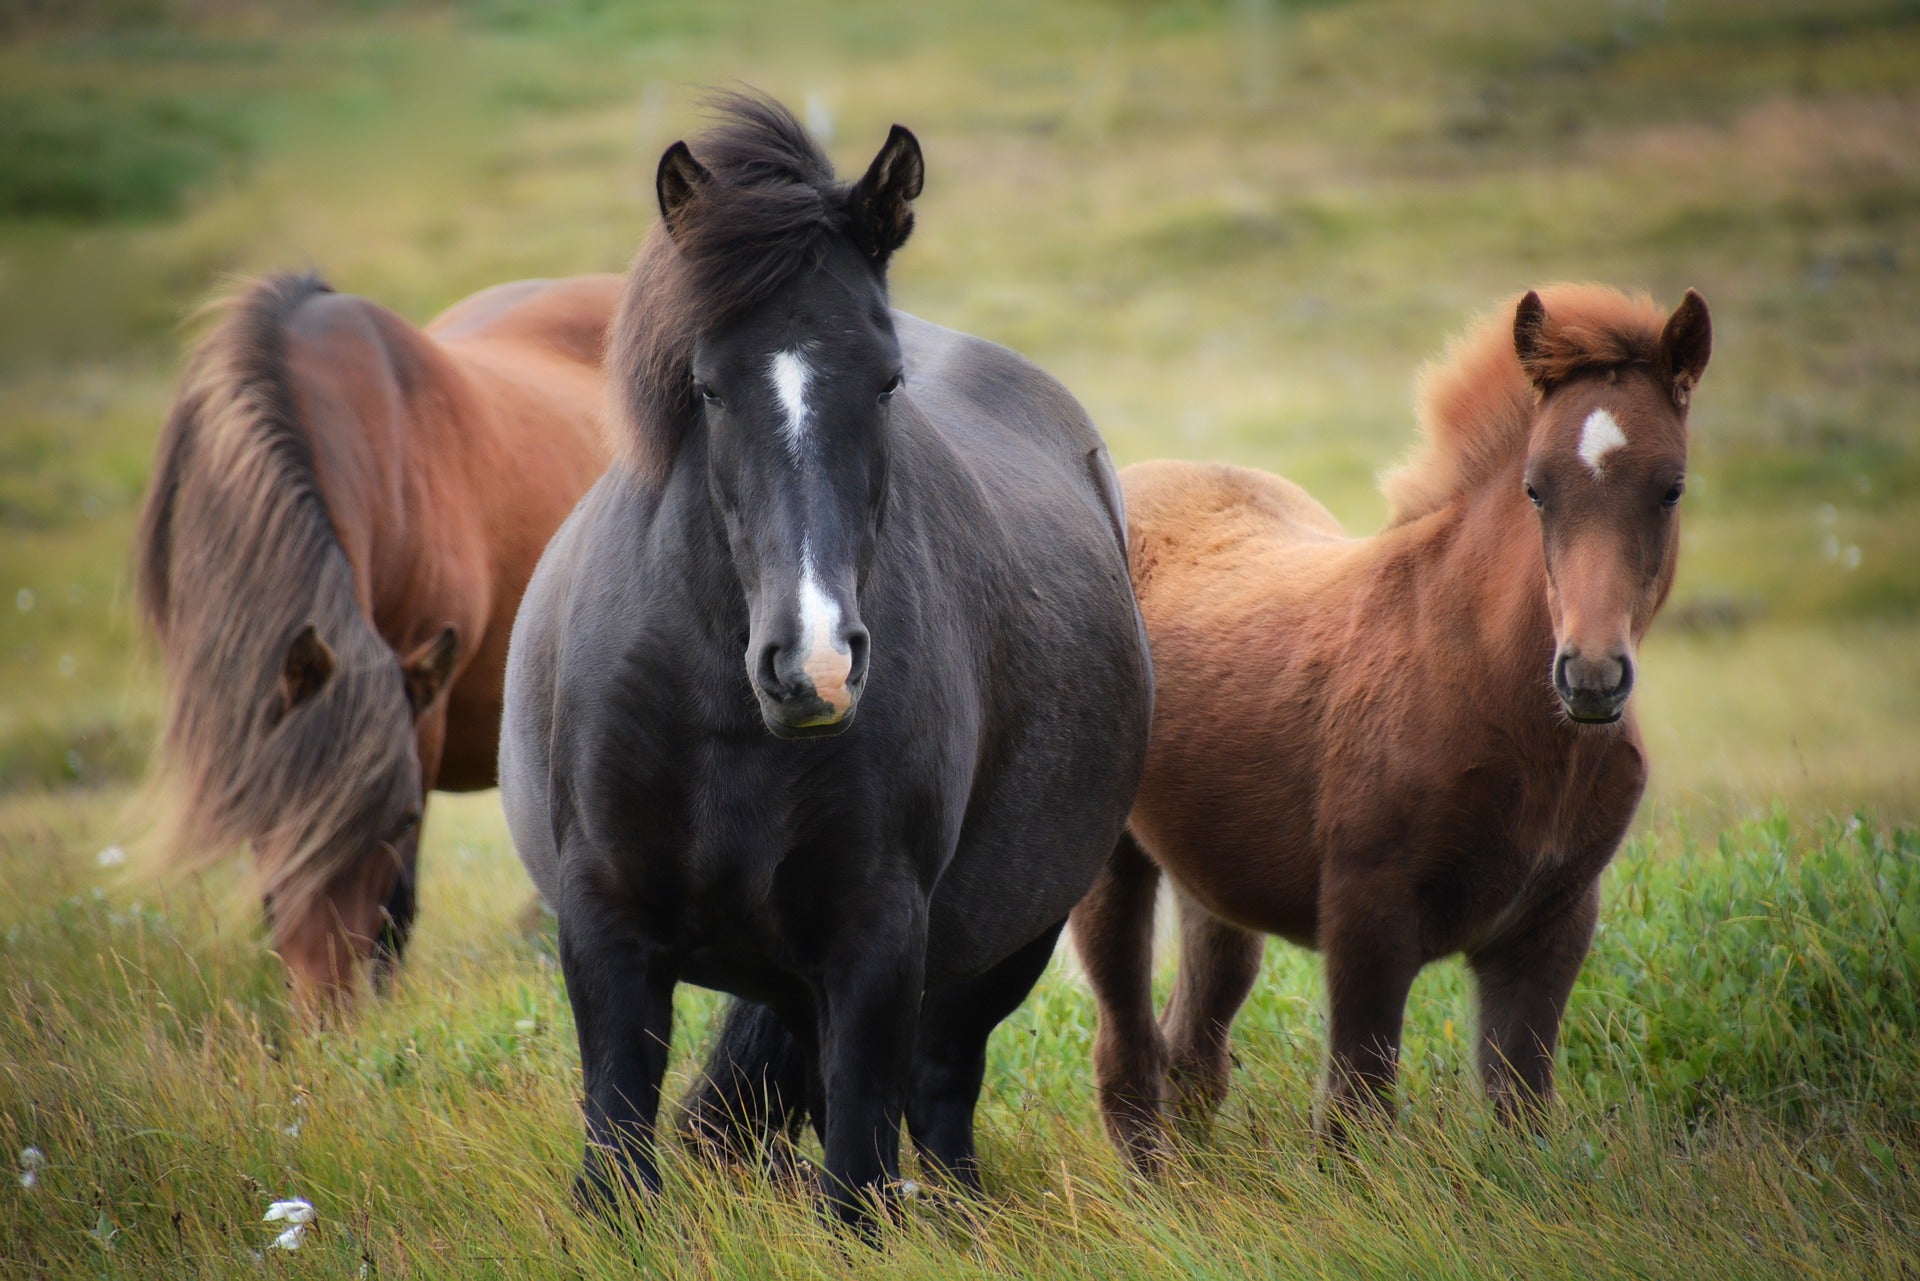 Two brown horses next to a black horse on a field